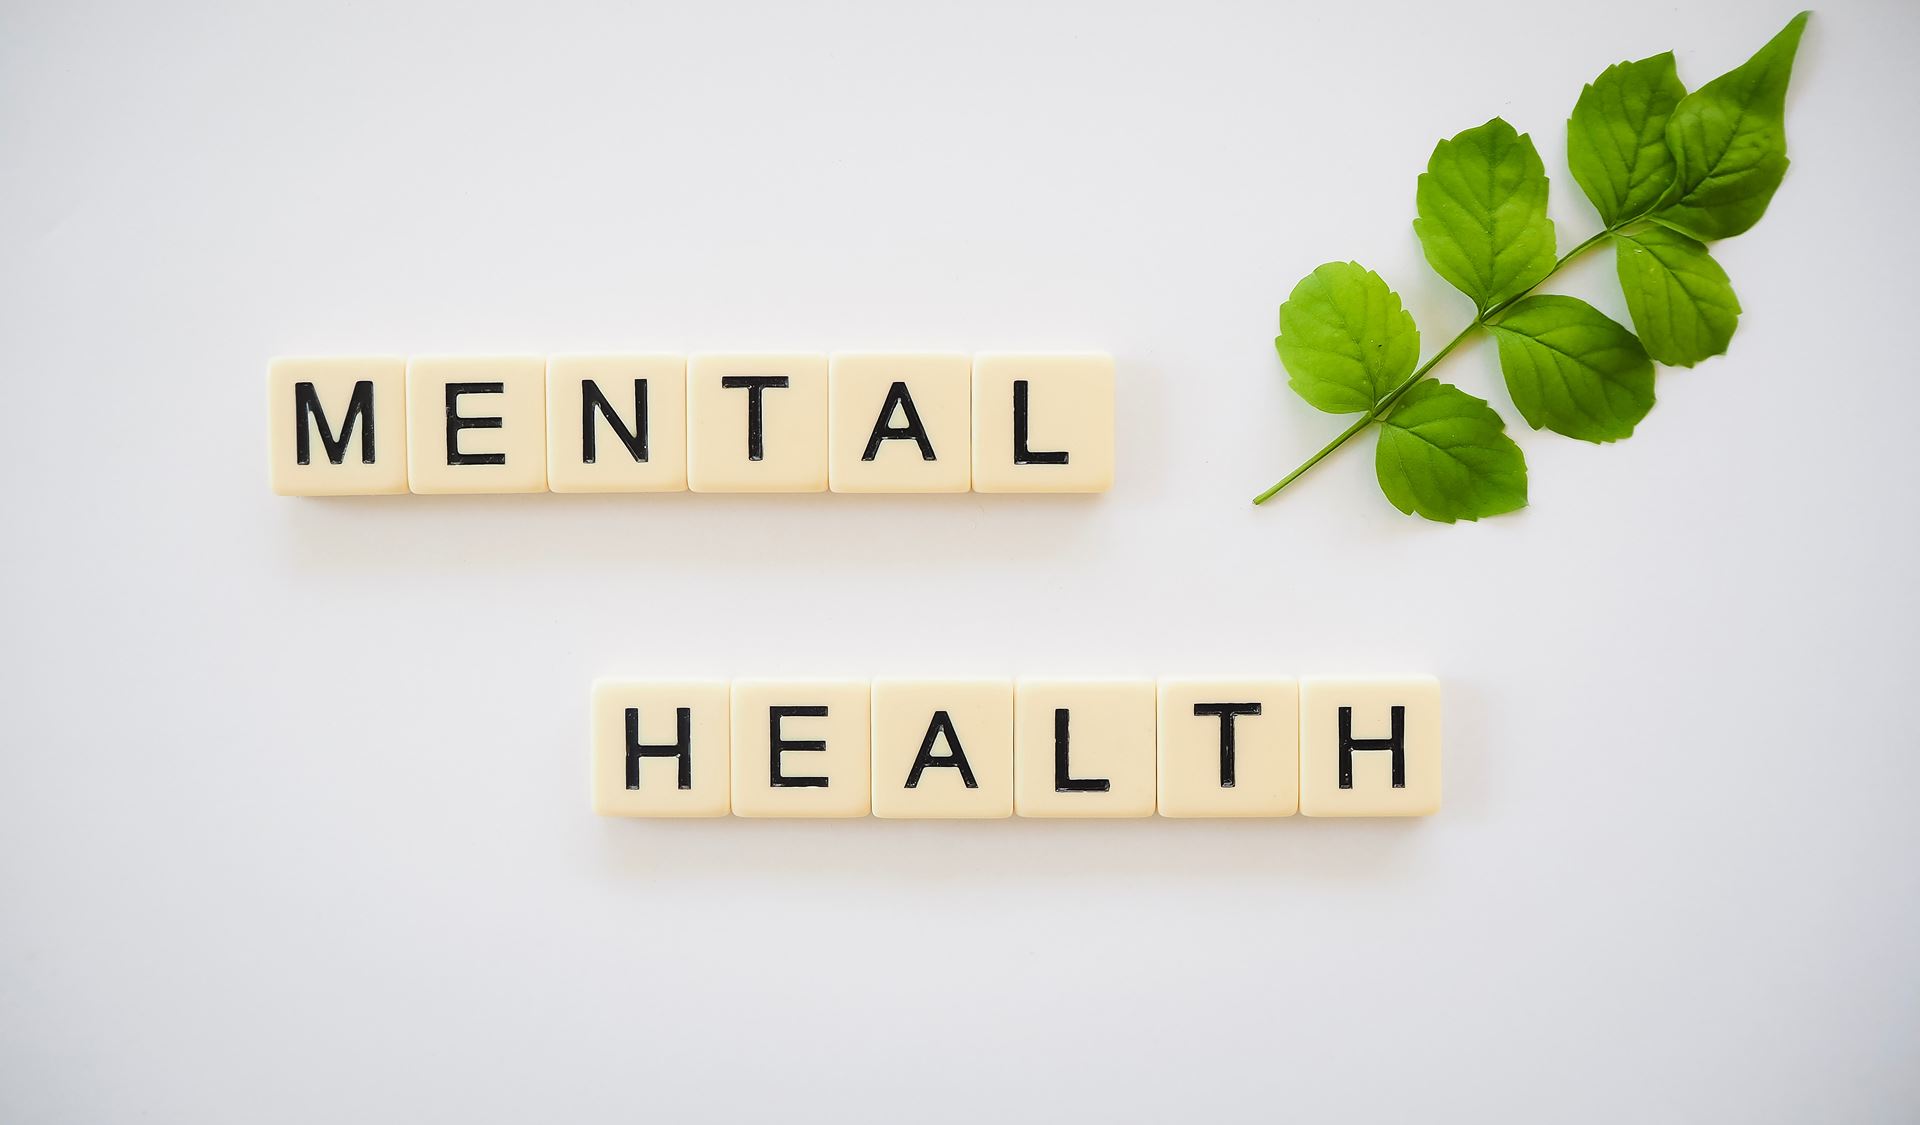 Scrabble Pieces spelling the words 'mental health' next to a small sprig of leaves